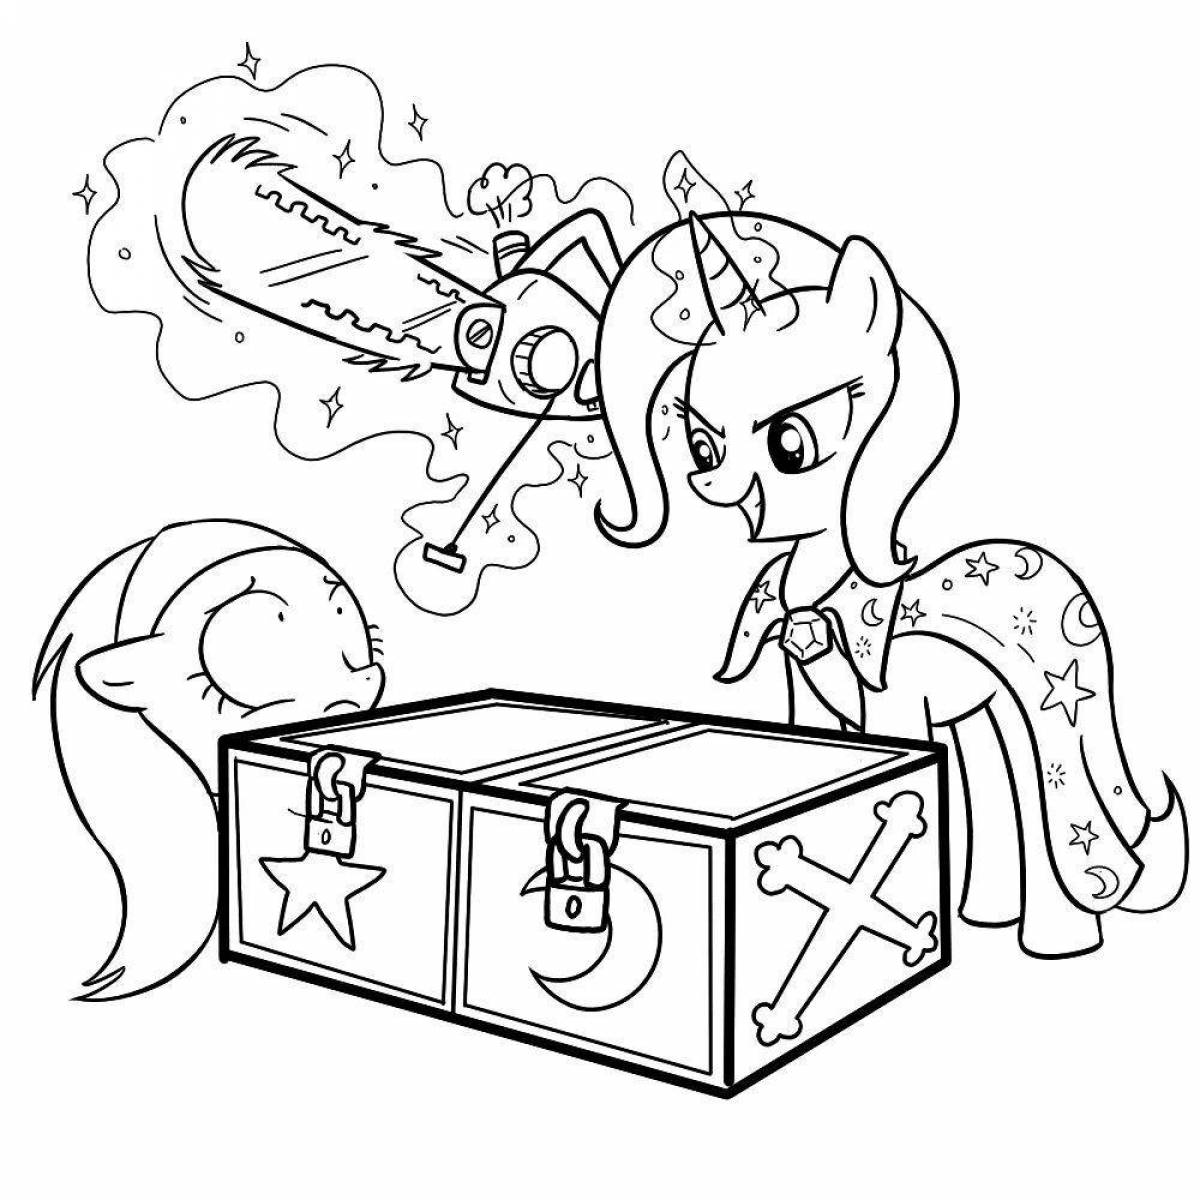 Coloring book funny trixie pony